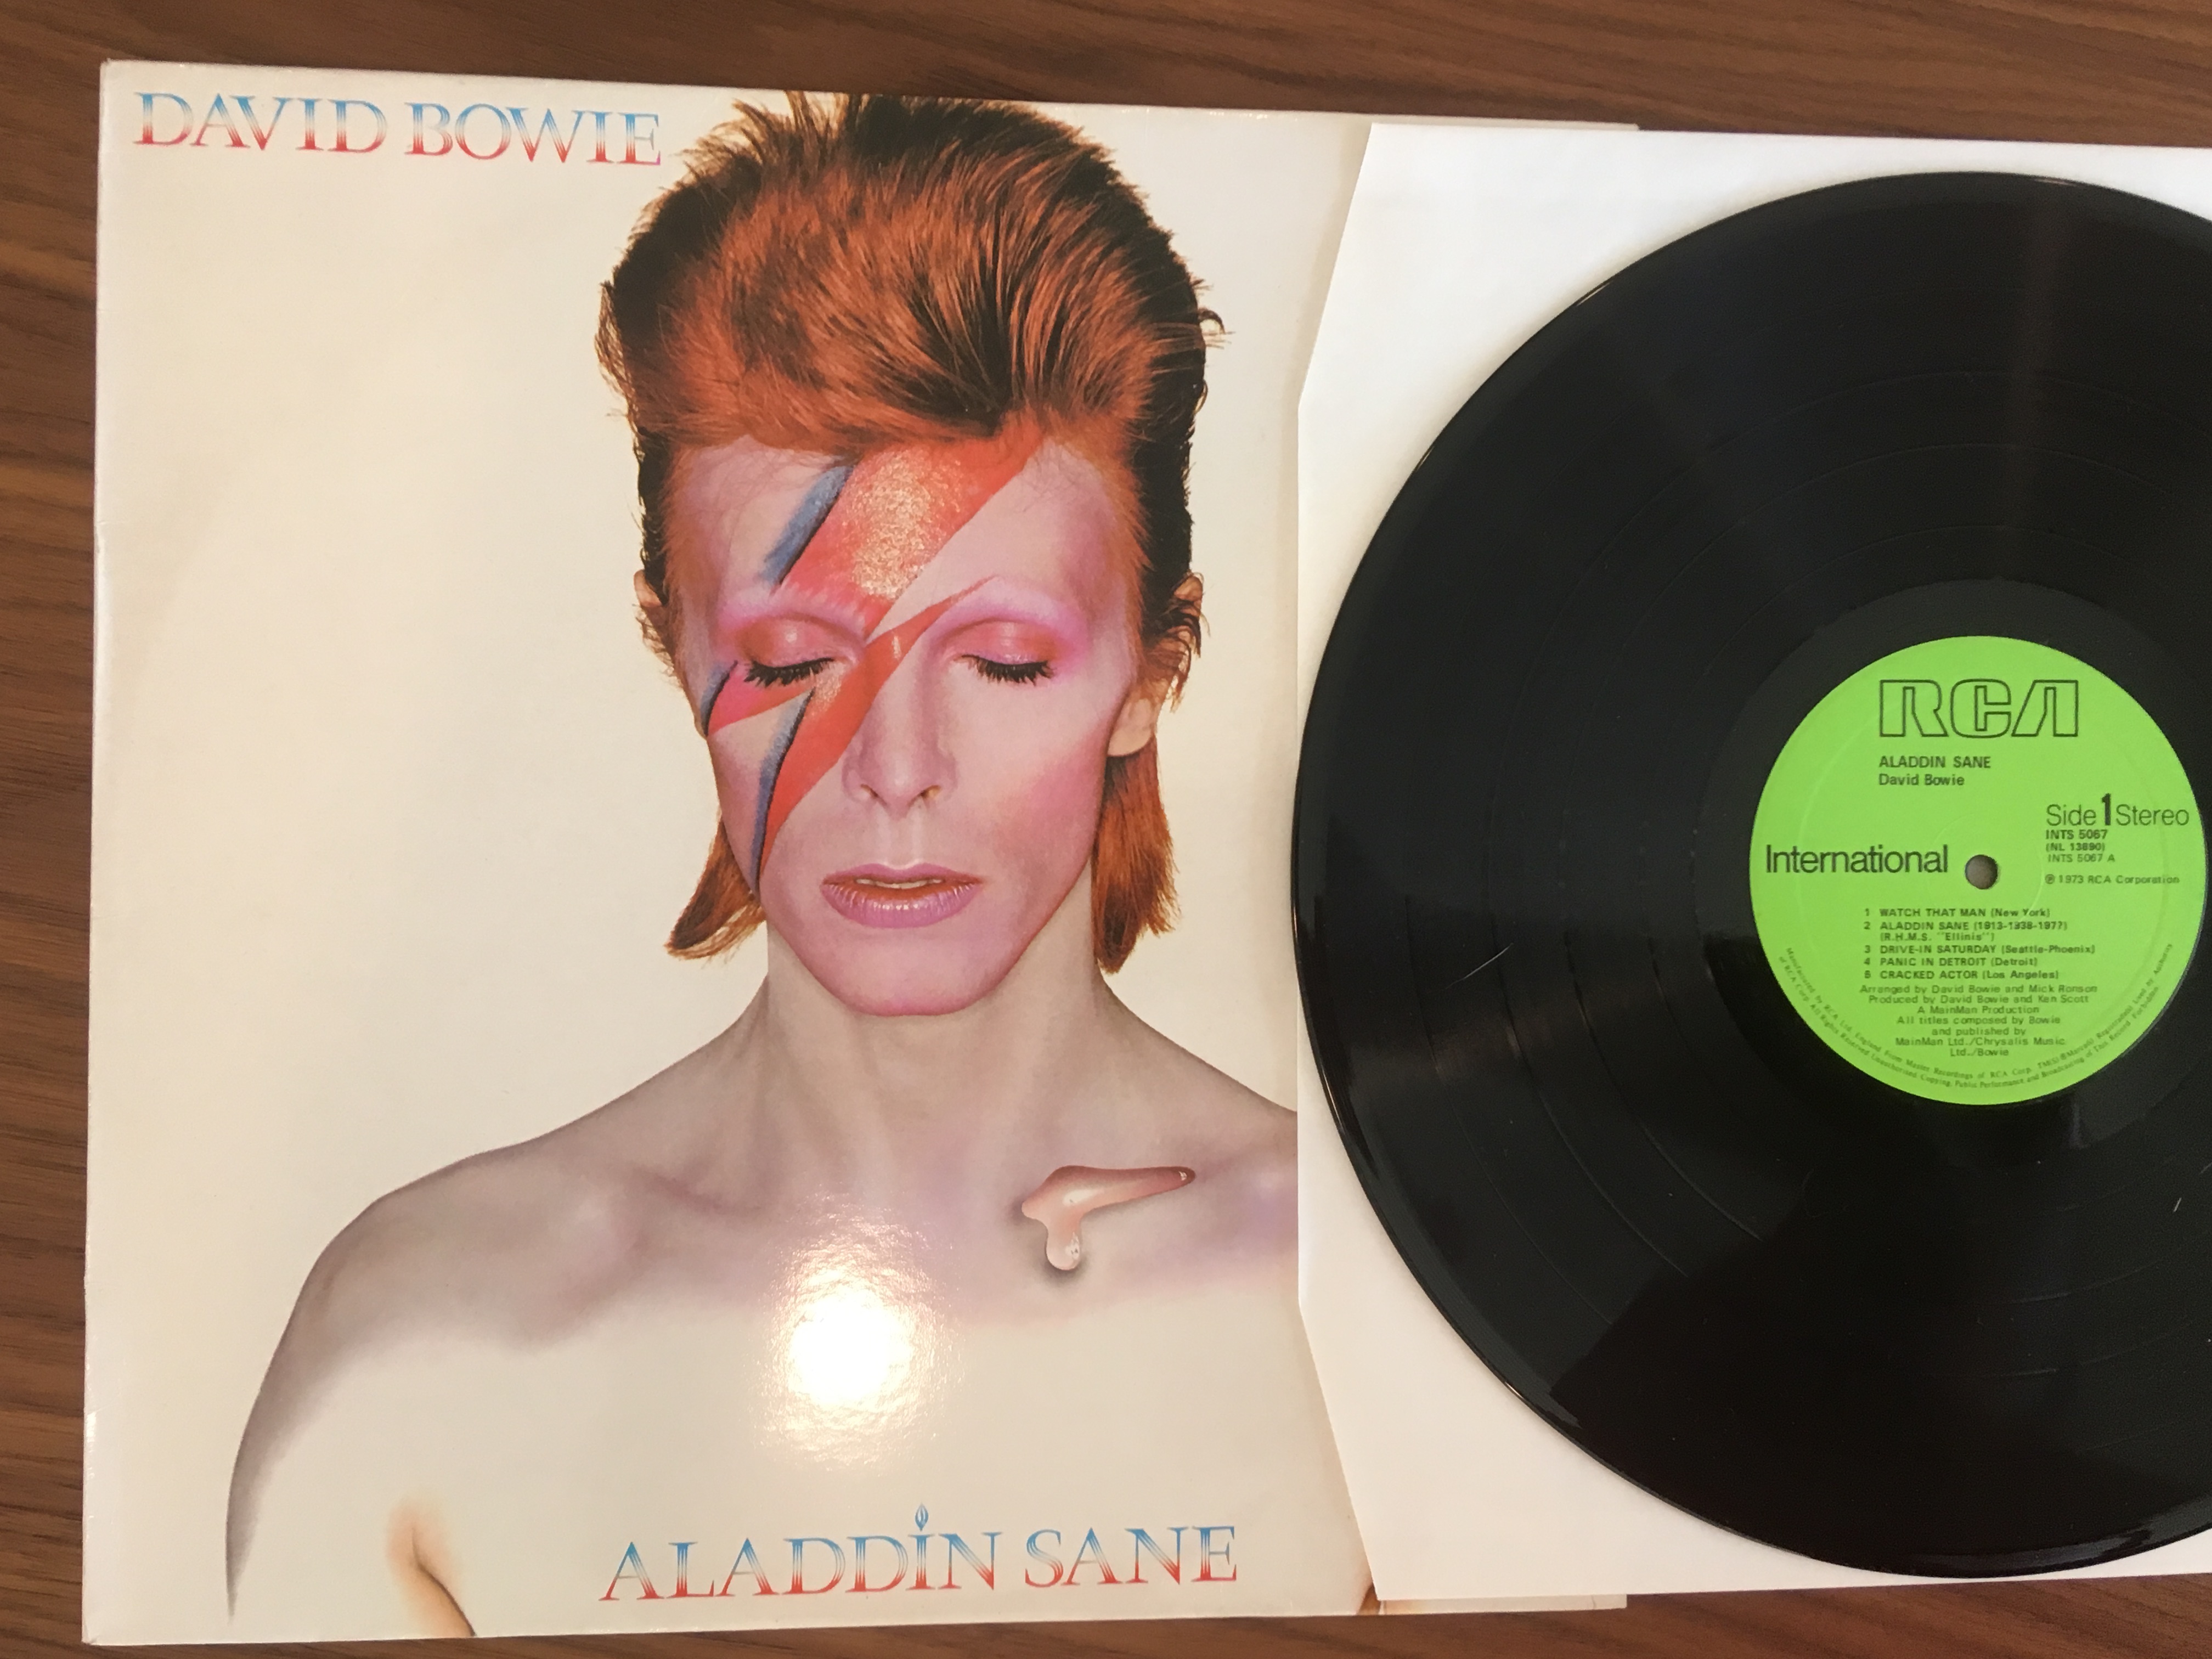 Photograph of David Bowie album cover by Jonathan Hope